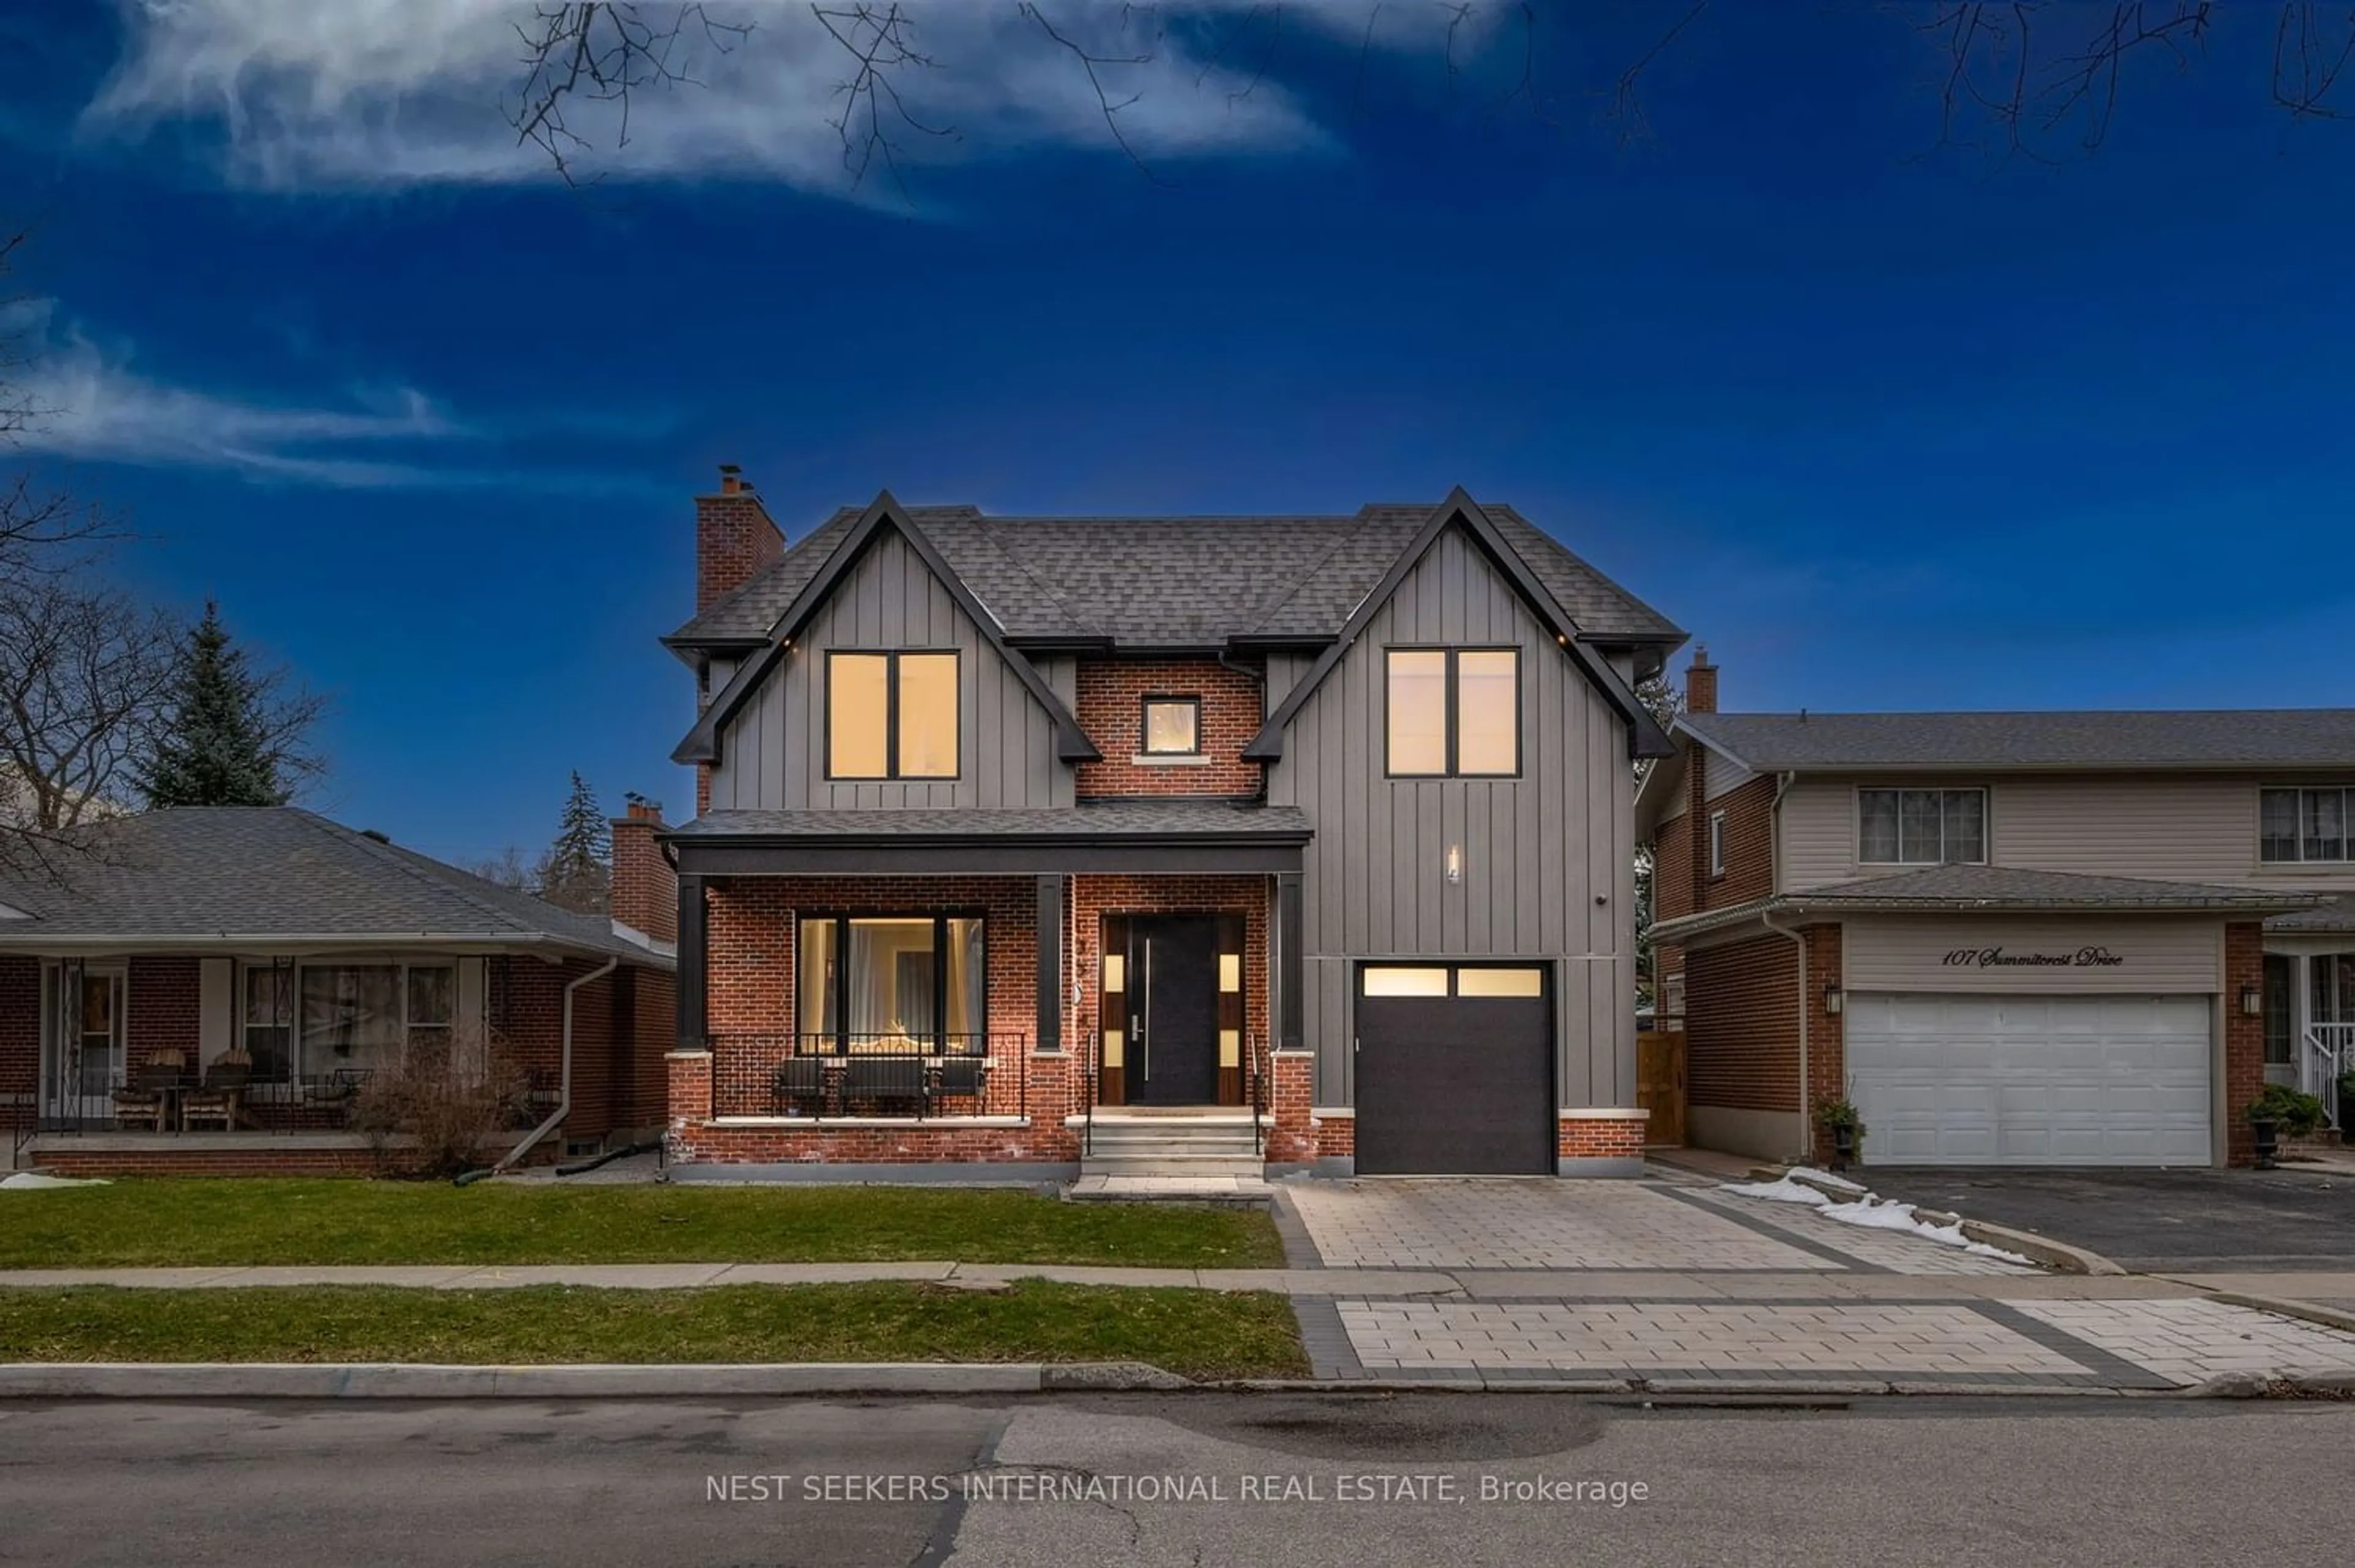 Home with brick exterior material for 105 Summitcrest Dr, Toronto Ontario M9P 1H7